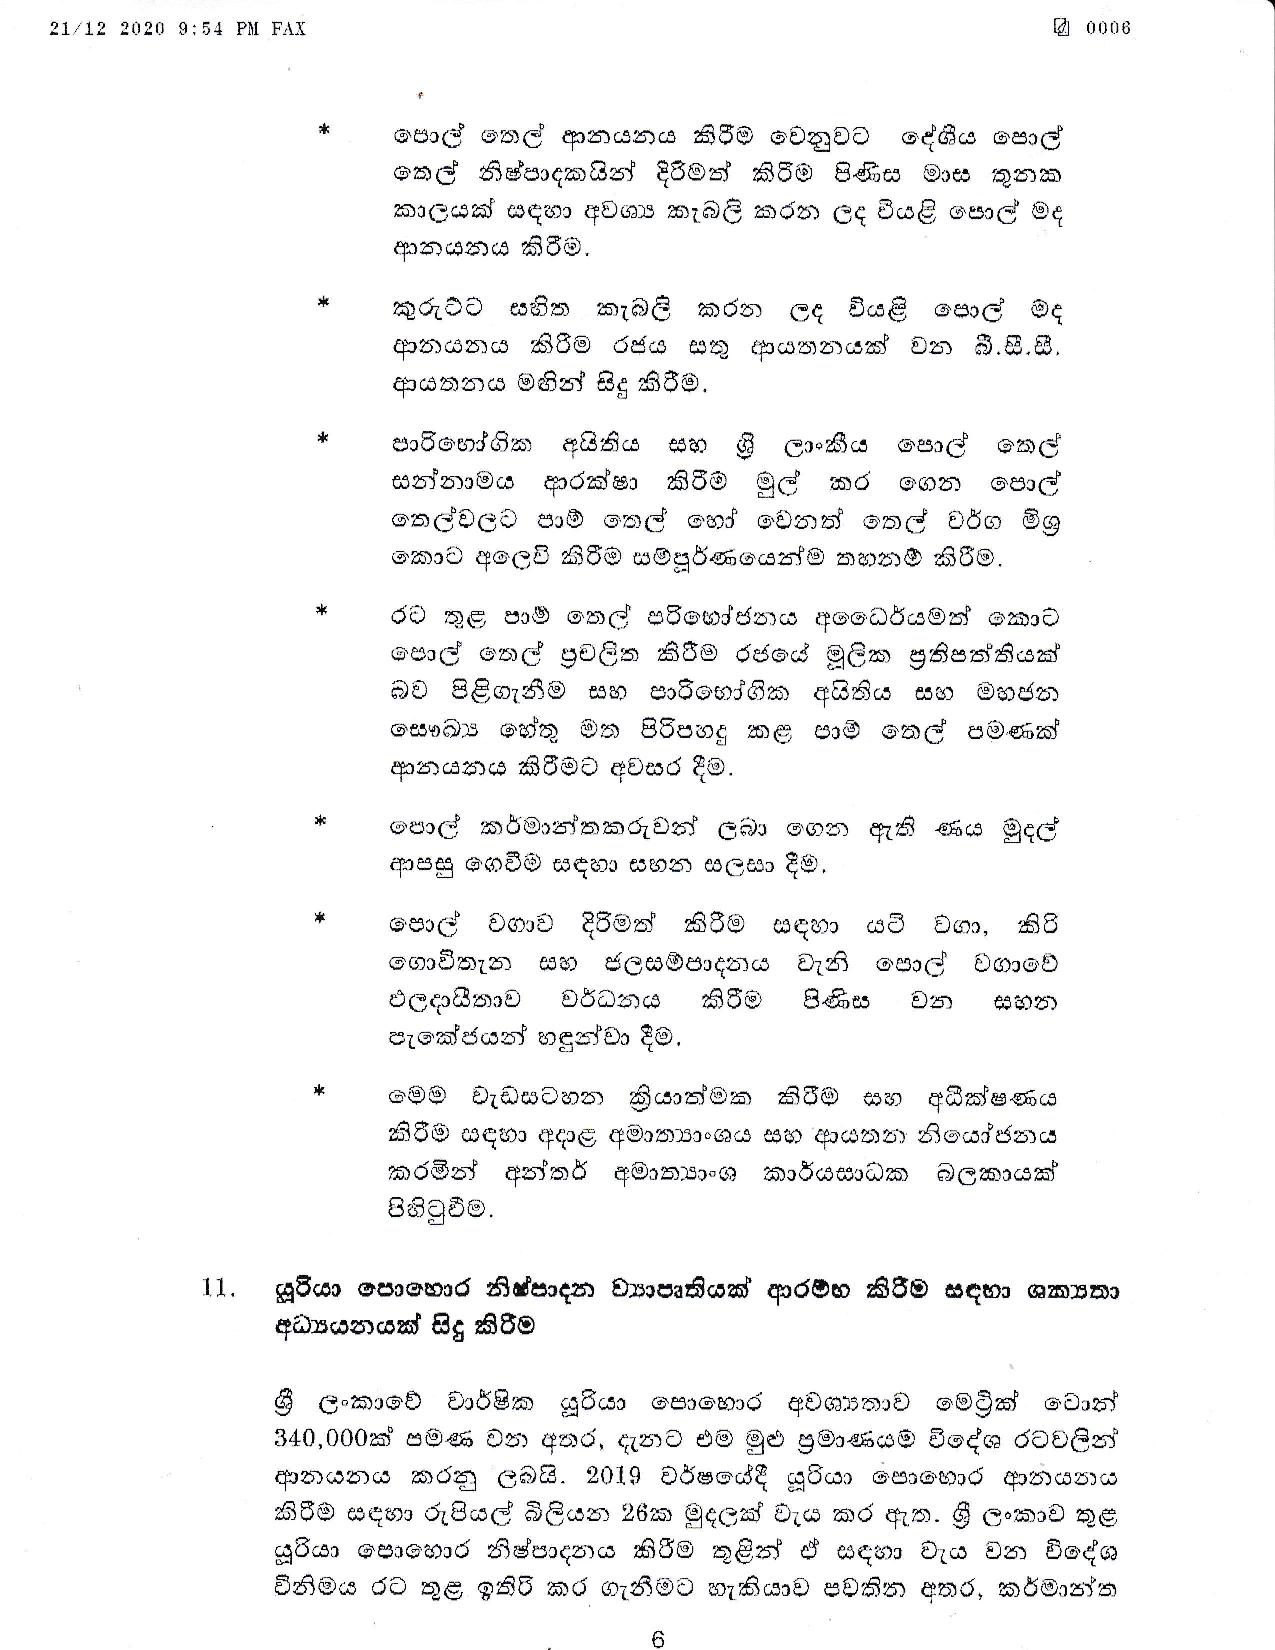 Cabinet Decision on 21.12.2020 page 006